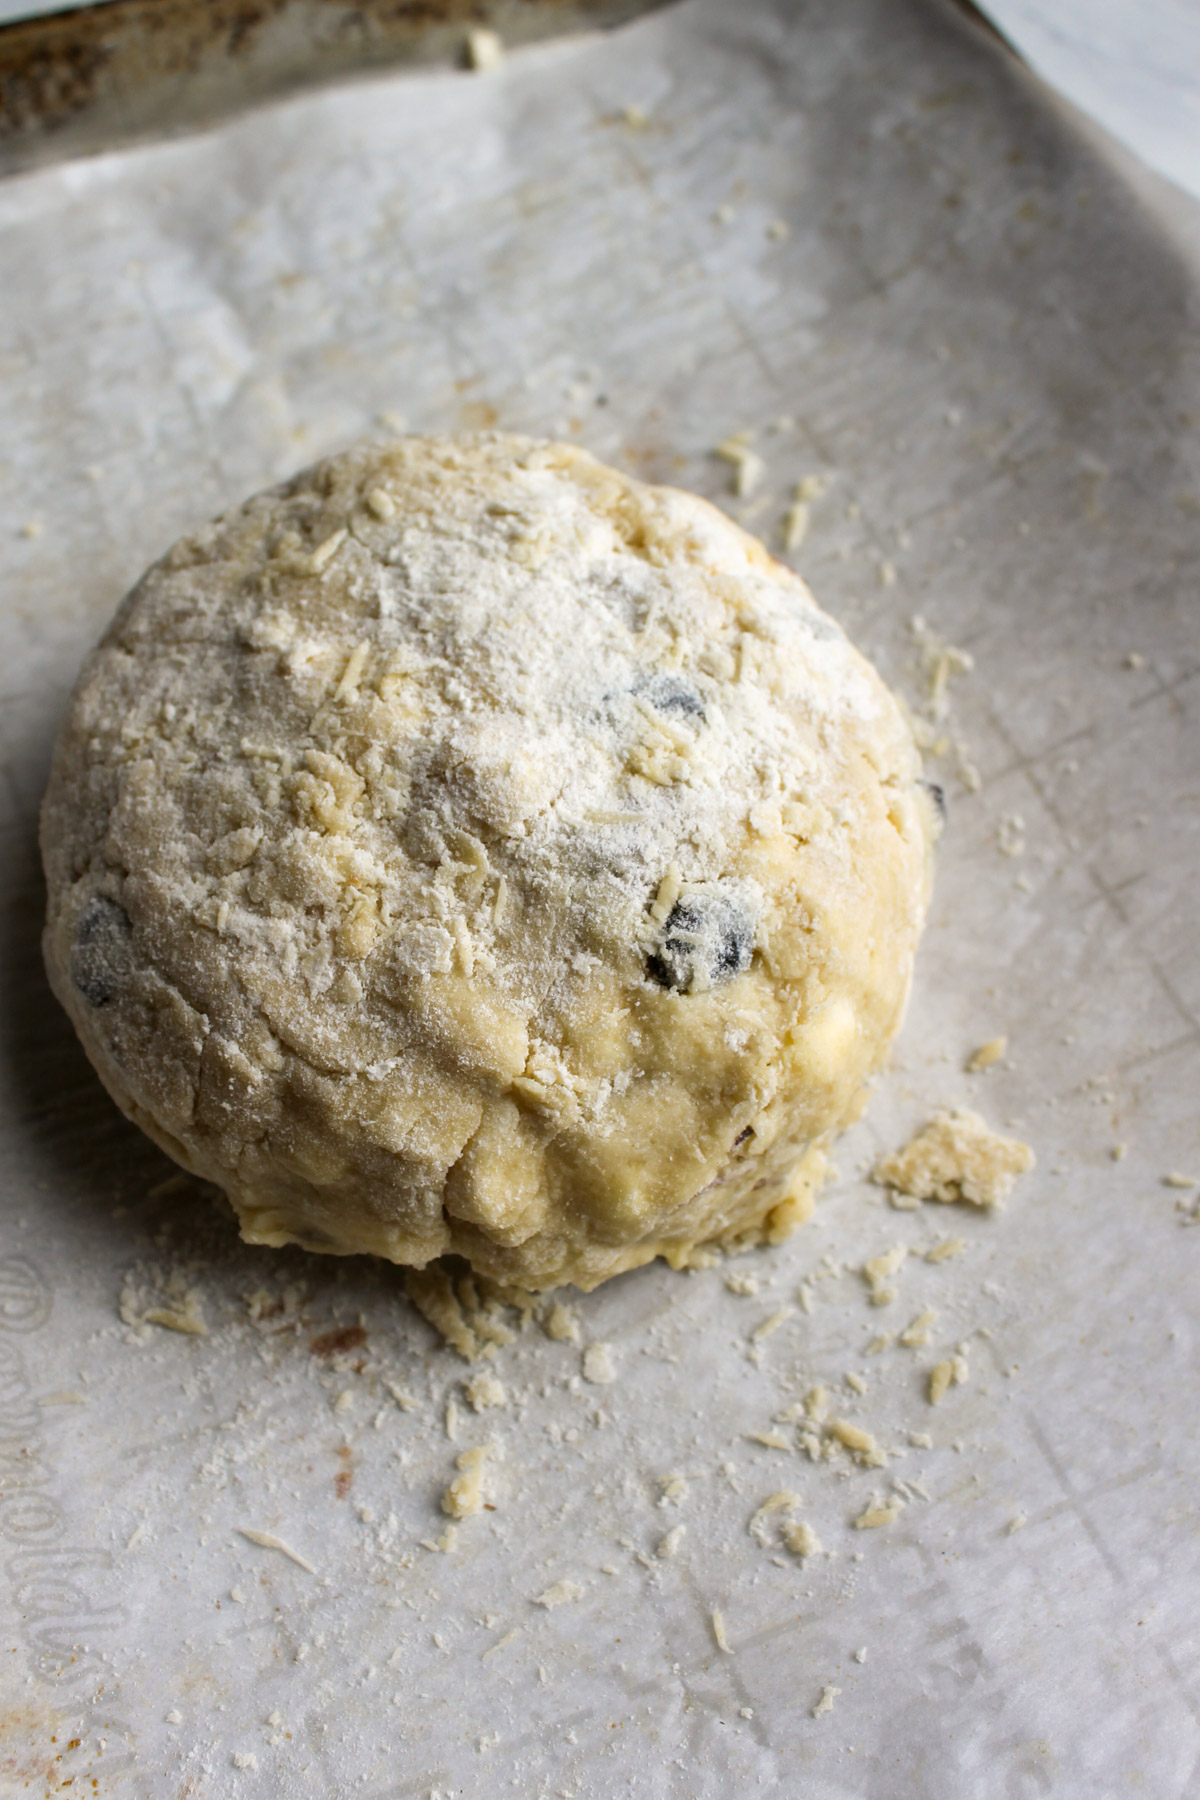 A round ball of almond cherry scone dough dusted with flour.